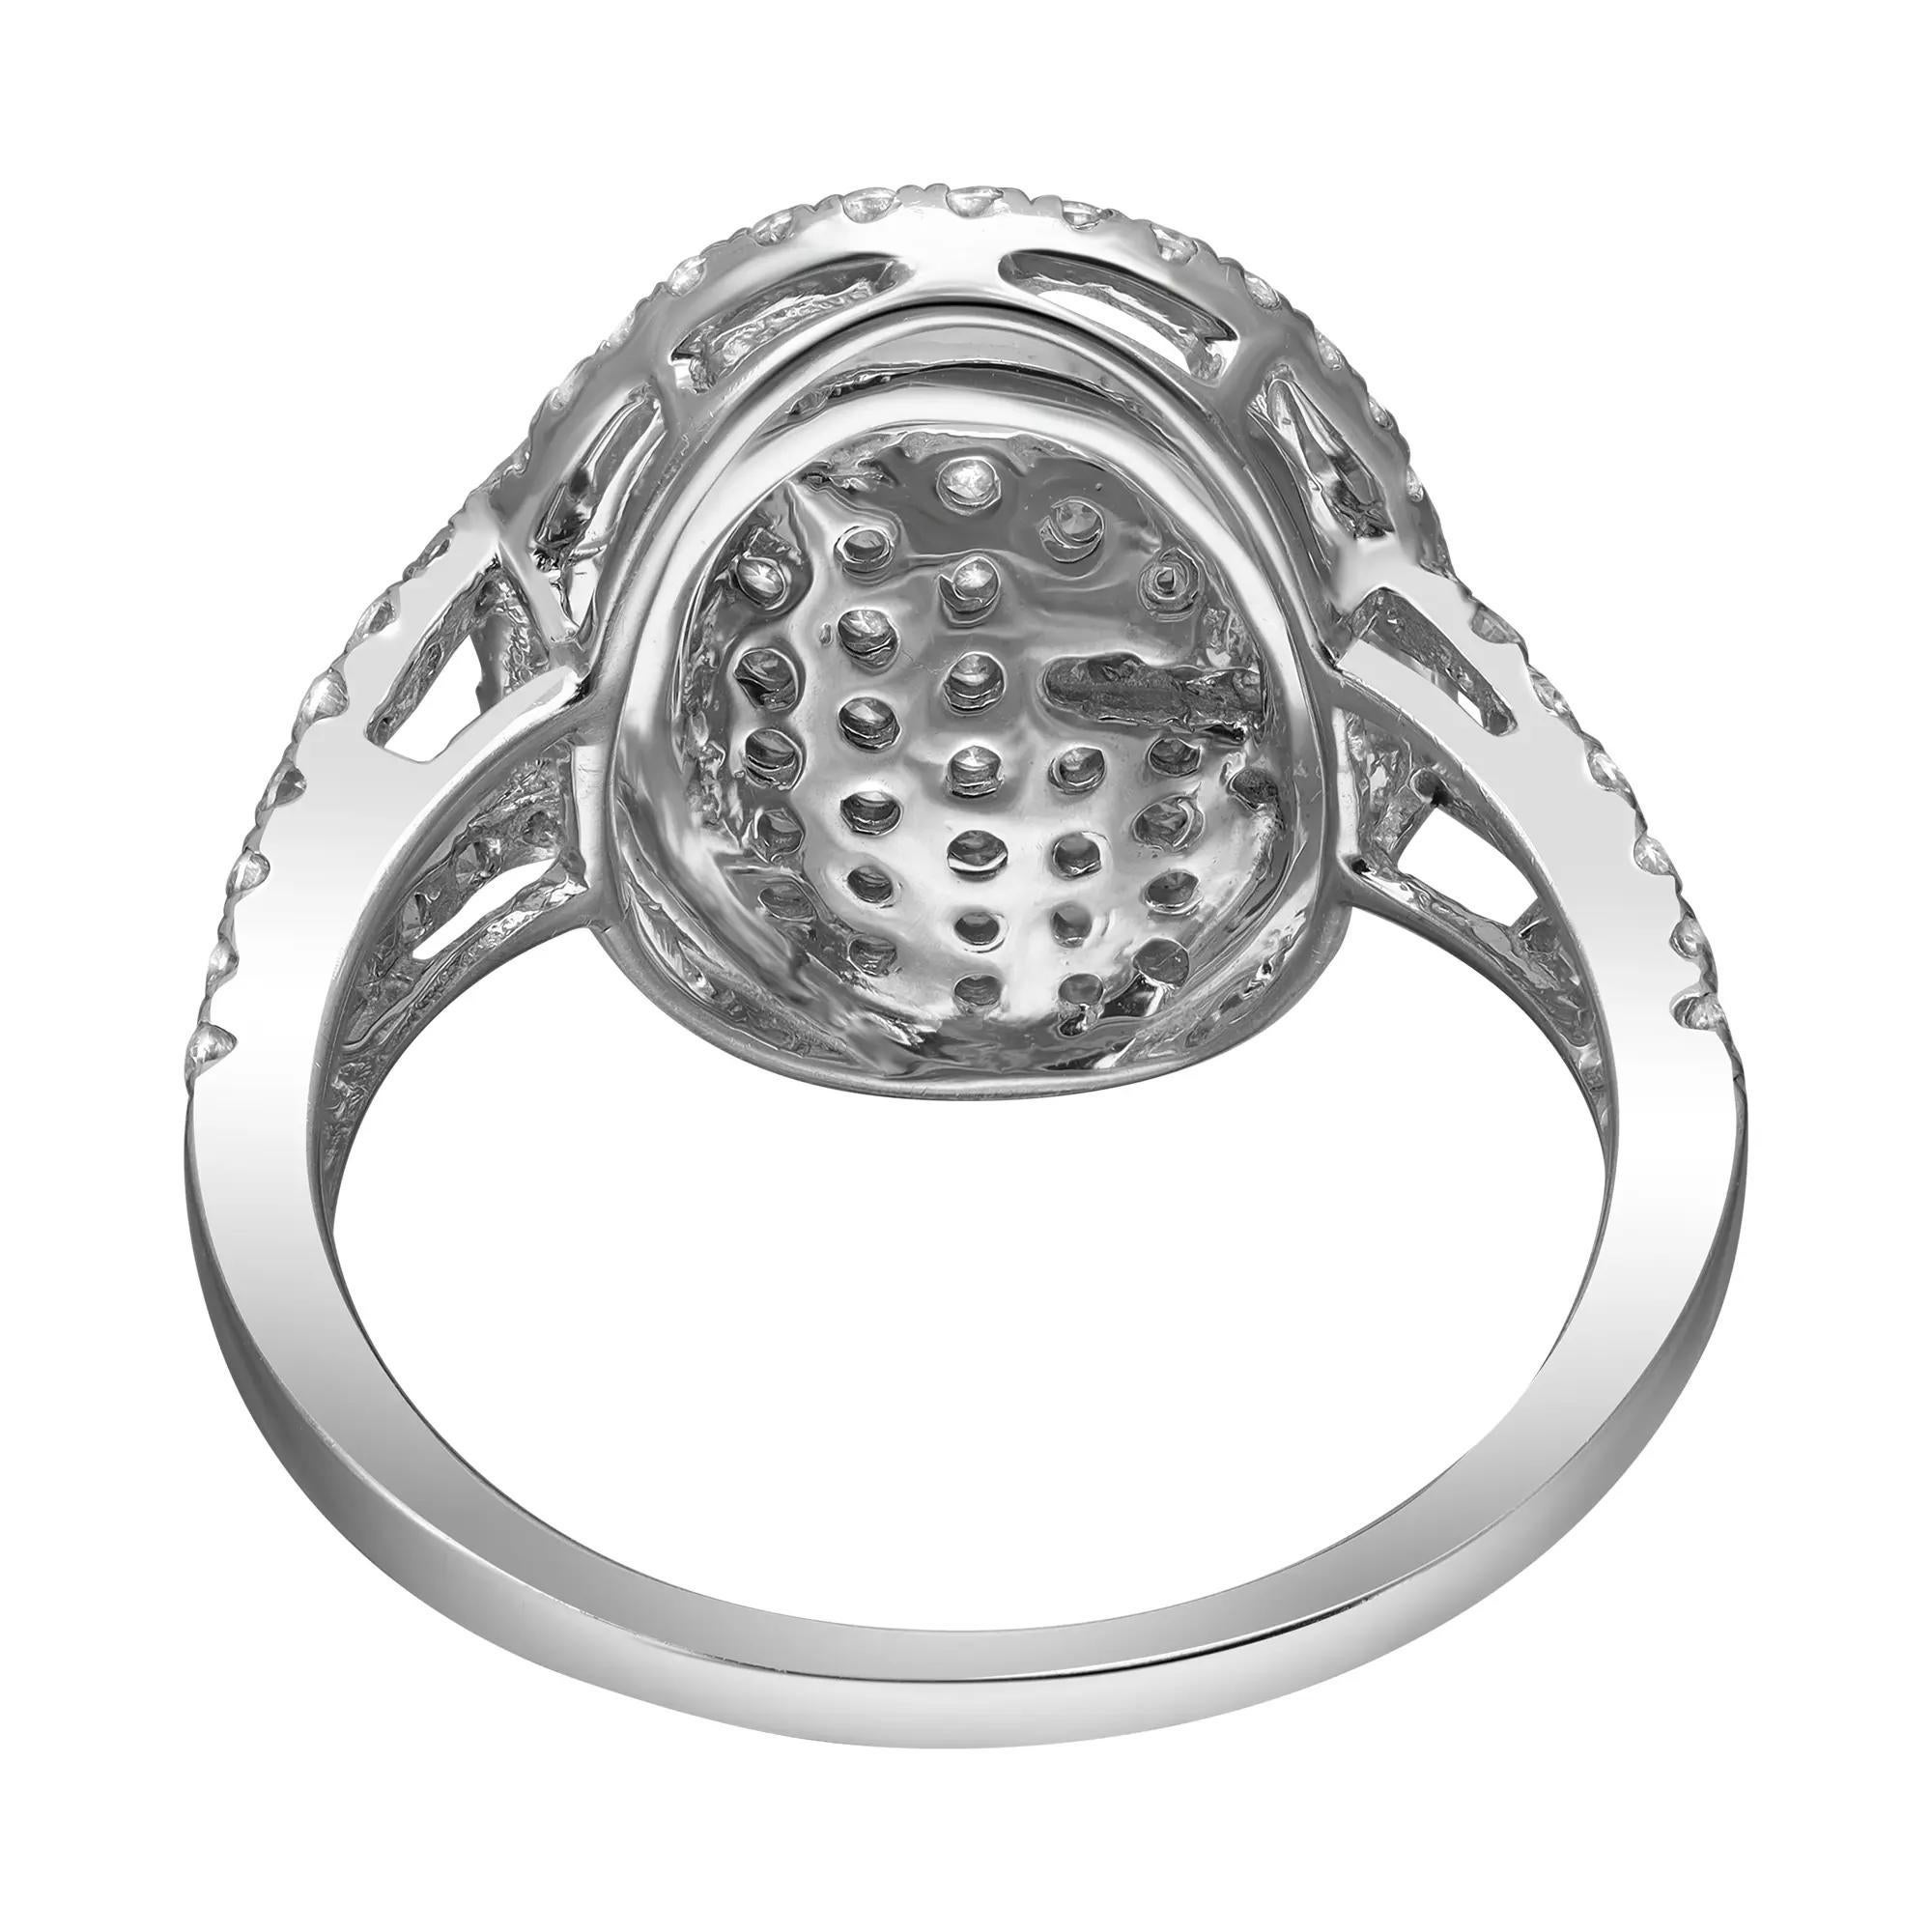 Round Cut 1.03cttw Pave Set Round Diamond Ladies Cocktail Ring 14k White Gold For Sale